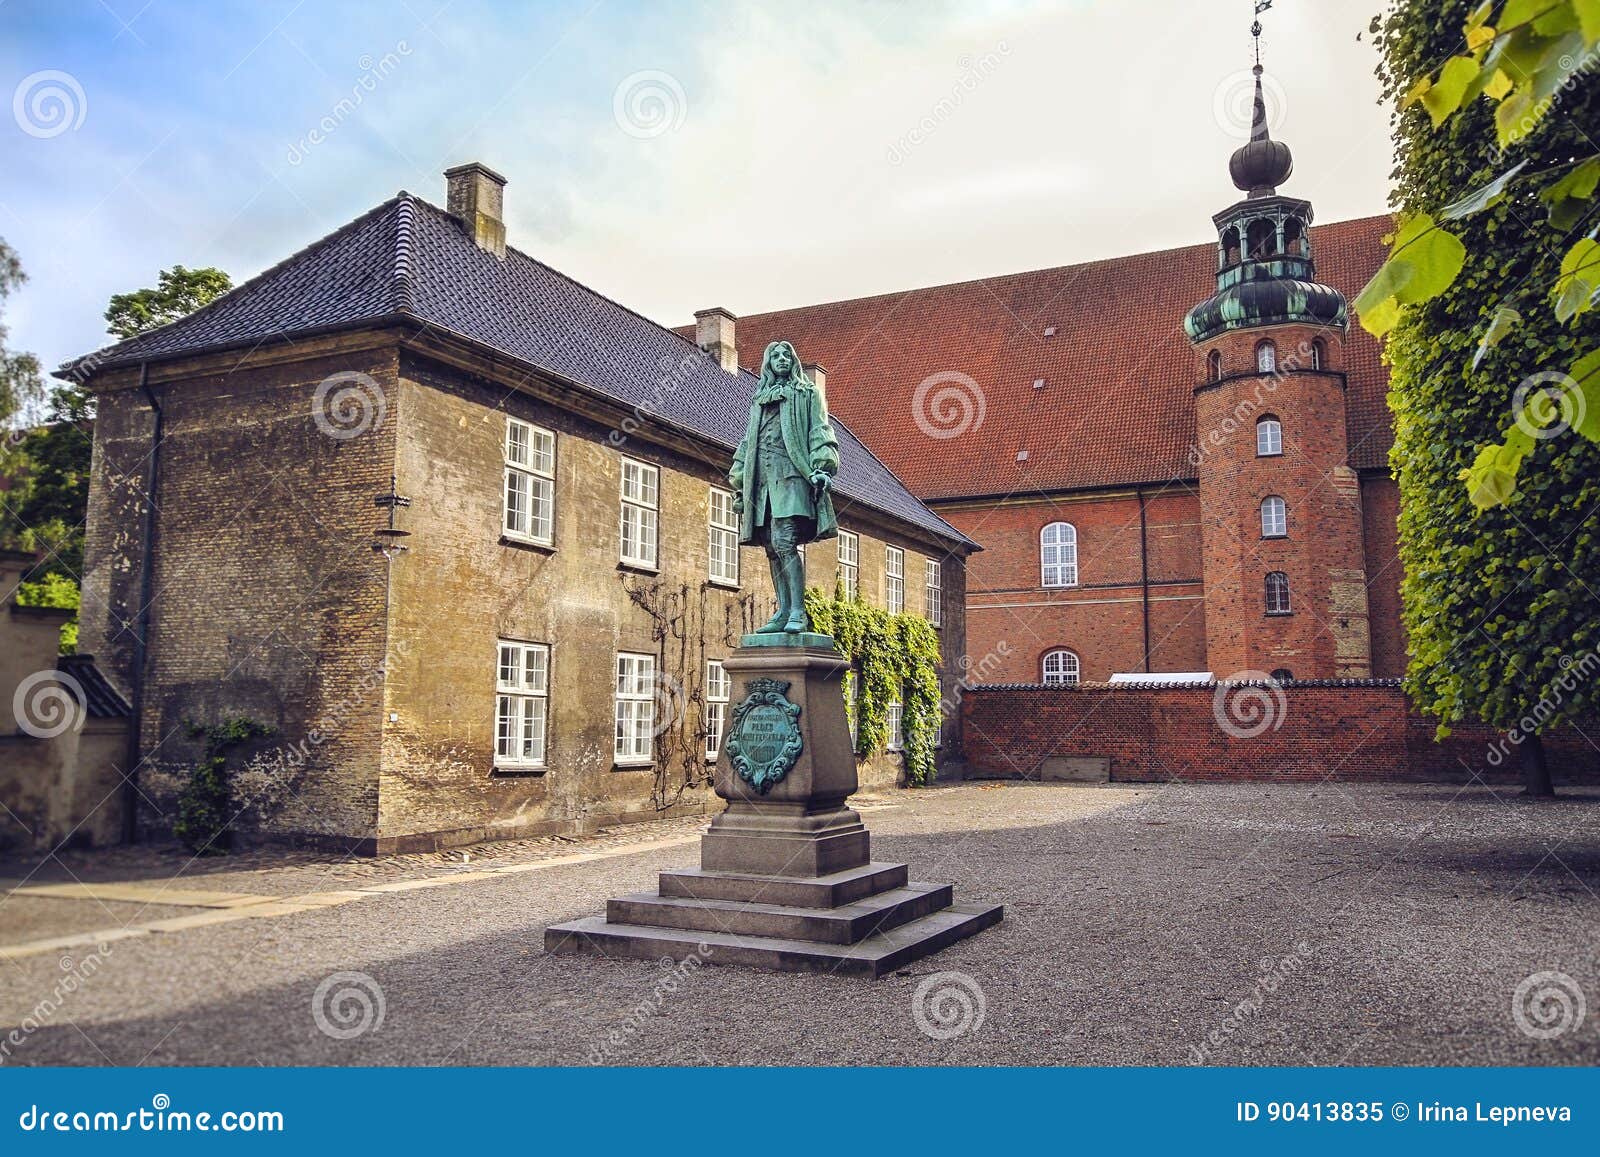 the statue of chancellor peder griffenfeld and a tower in copenhagen